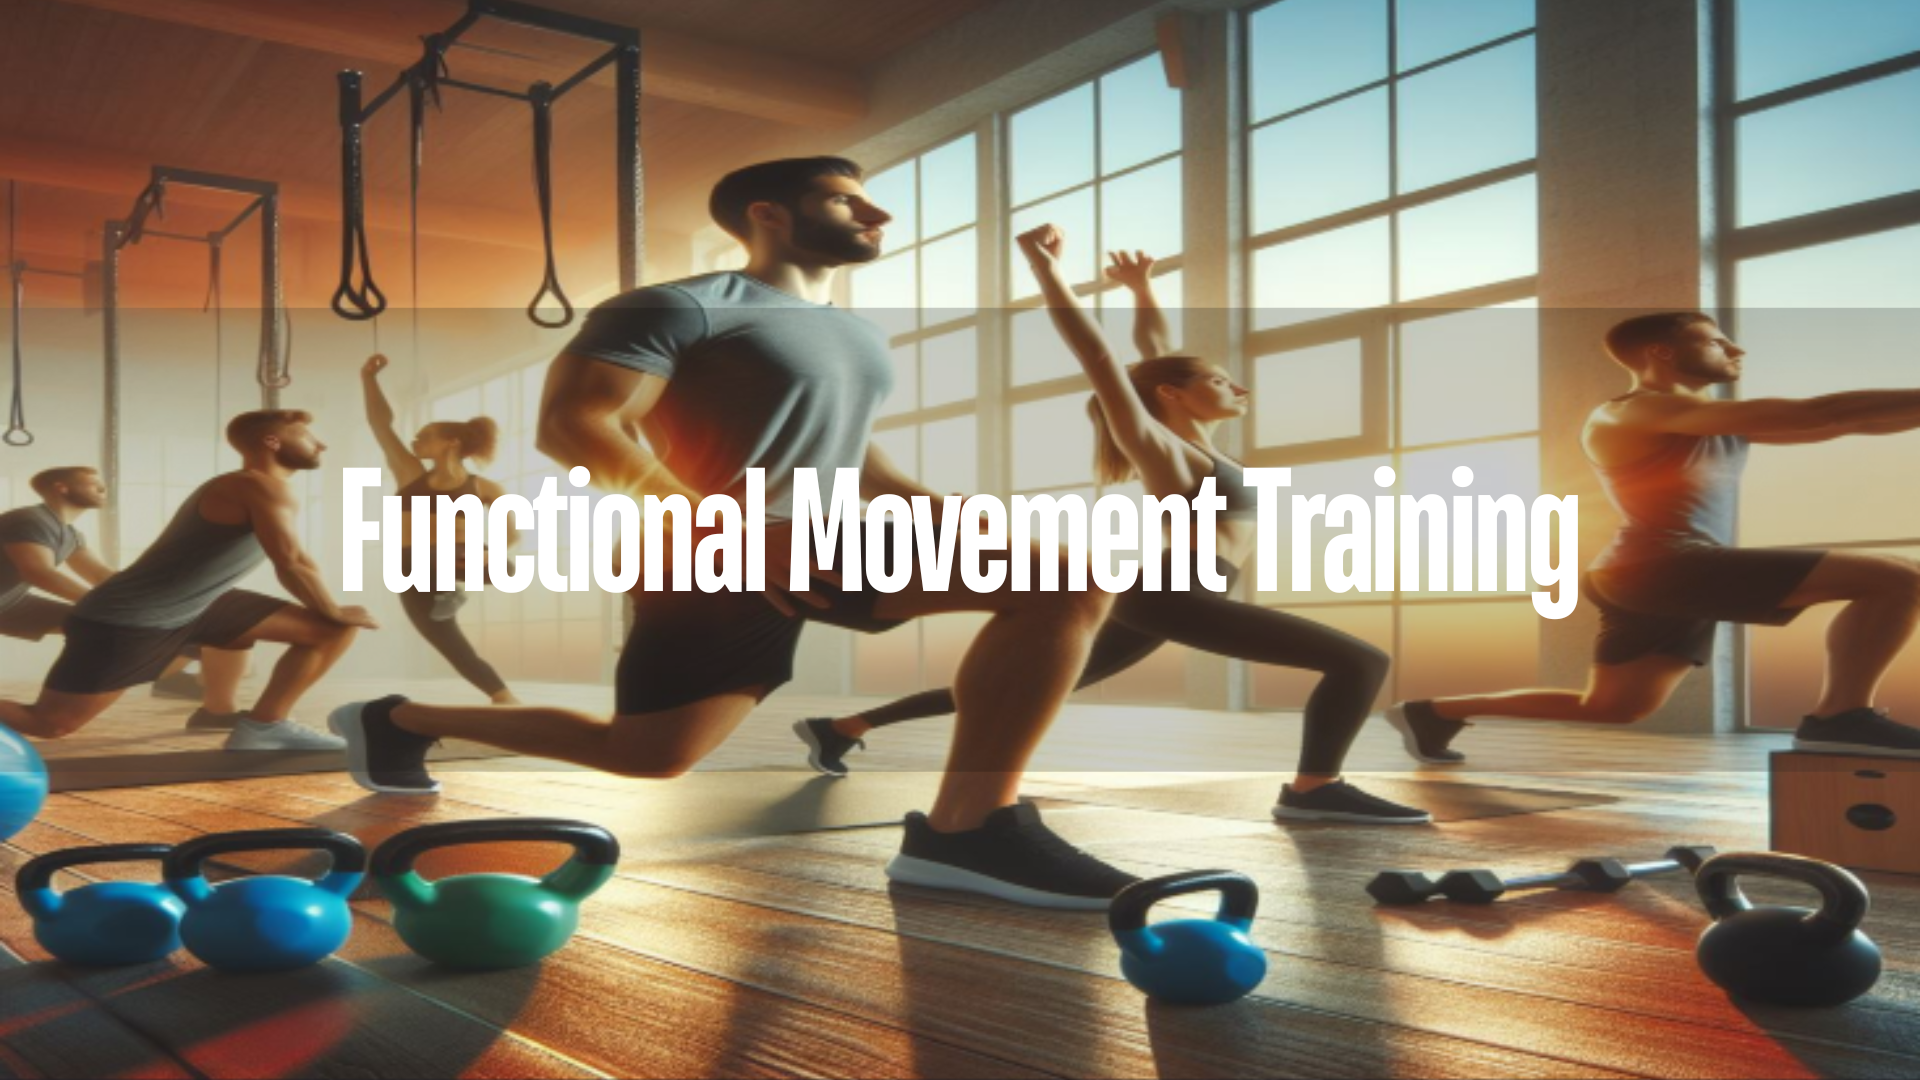 Functional Training, Mobility Exercises, Functional Movement, Strength and Balance Training, Injury Prevention Exercises, Everyday Fitness, Holistic Fitness, Core Stability Exercises